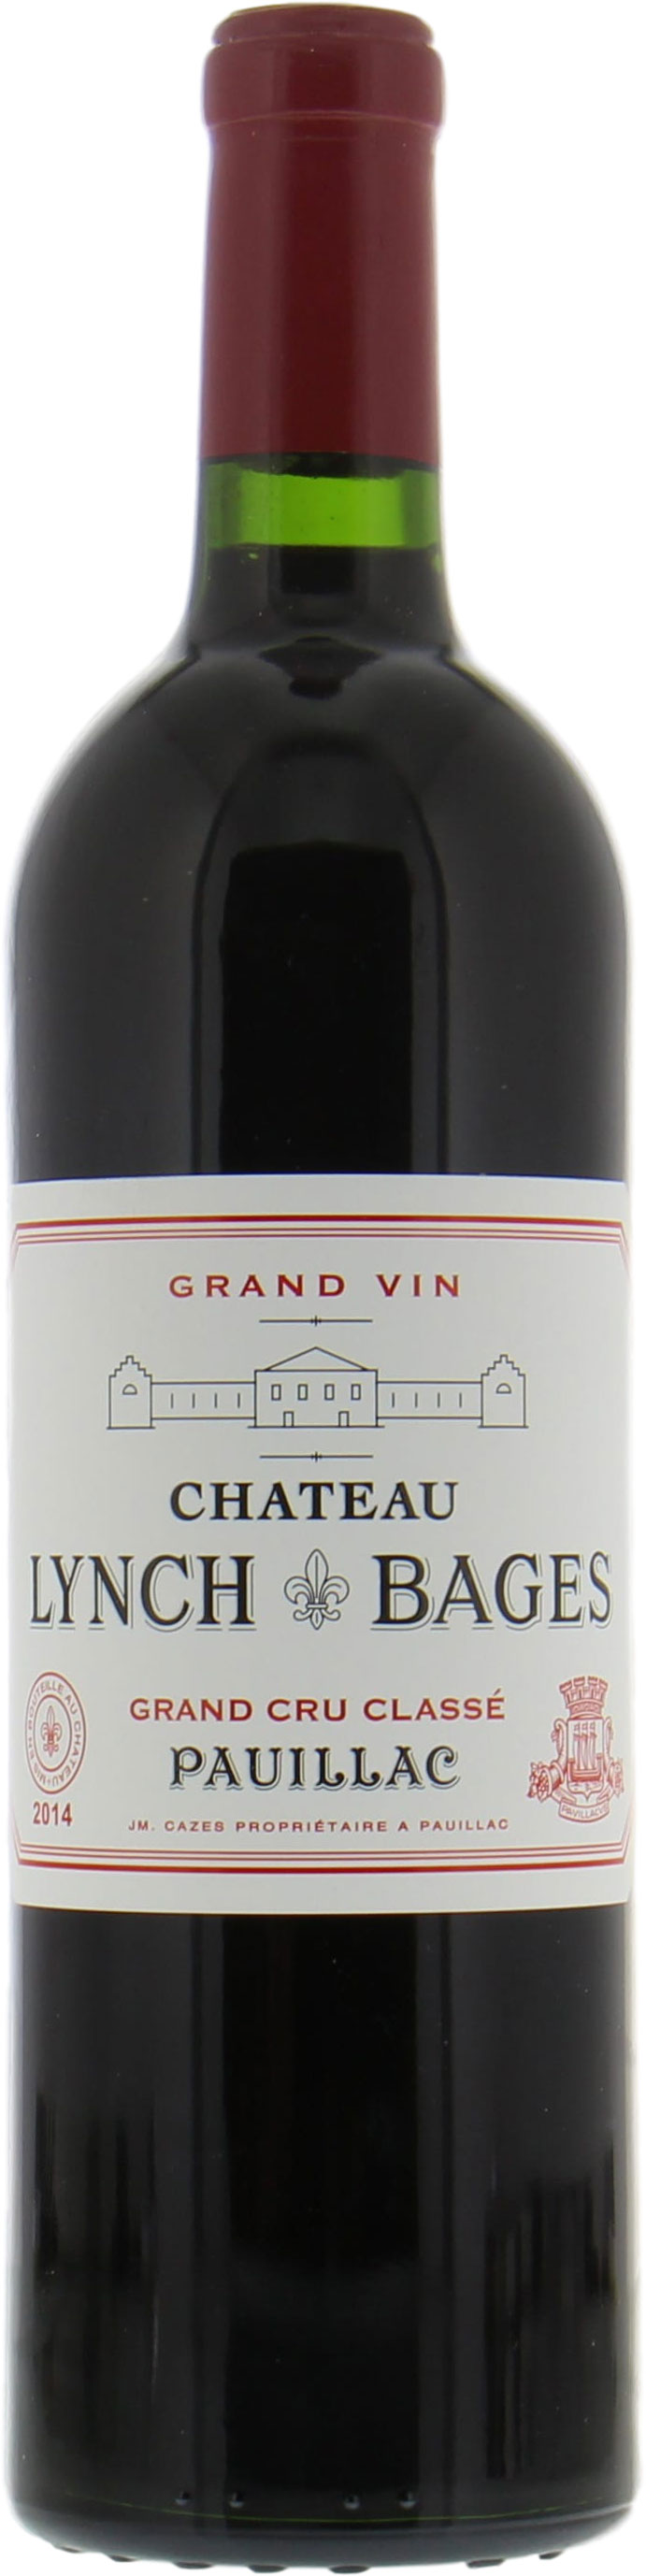 Chateau Lynch Bages - Chateau Lynch Bages 2014 Perfect